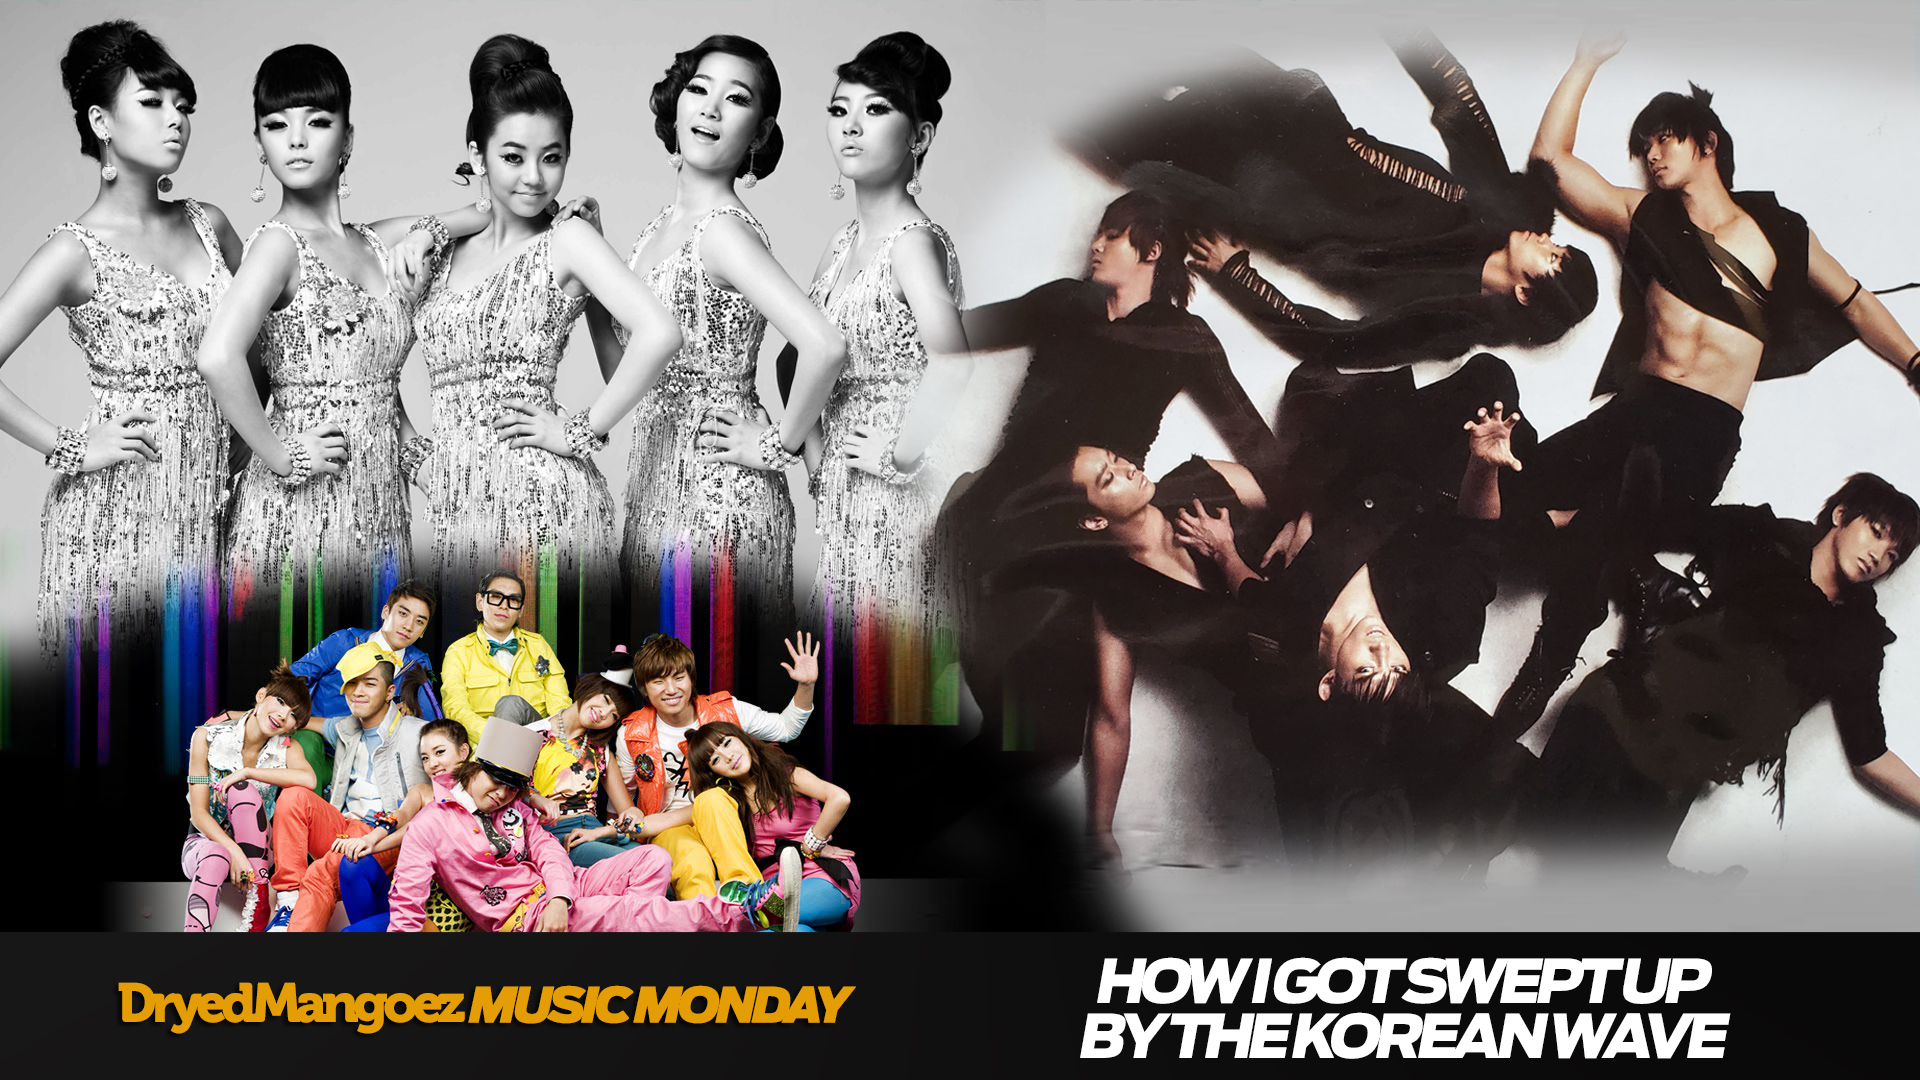 Music Monday, July 20, 2020 – How I Got Swept Up By the Korean Wave